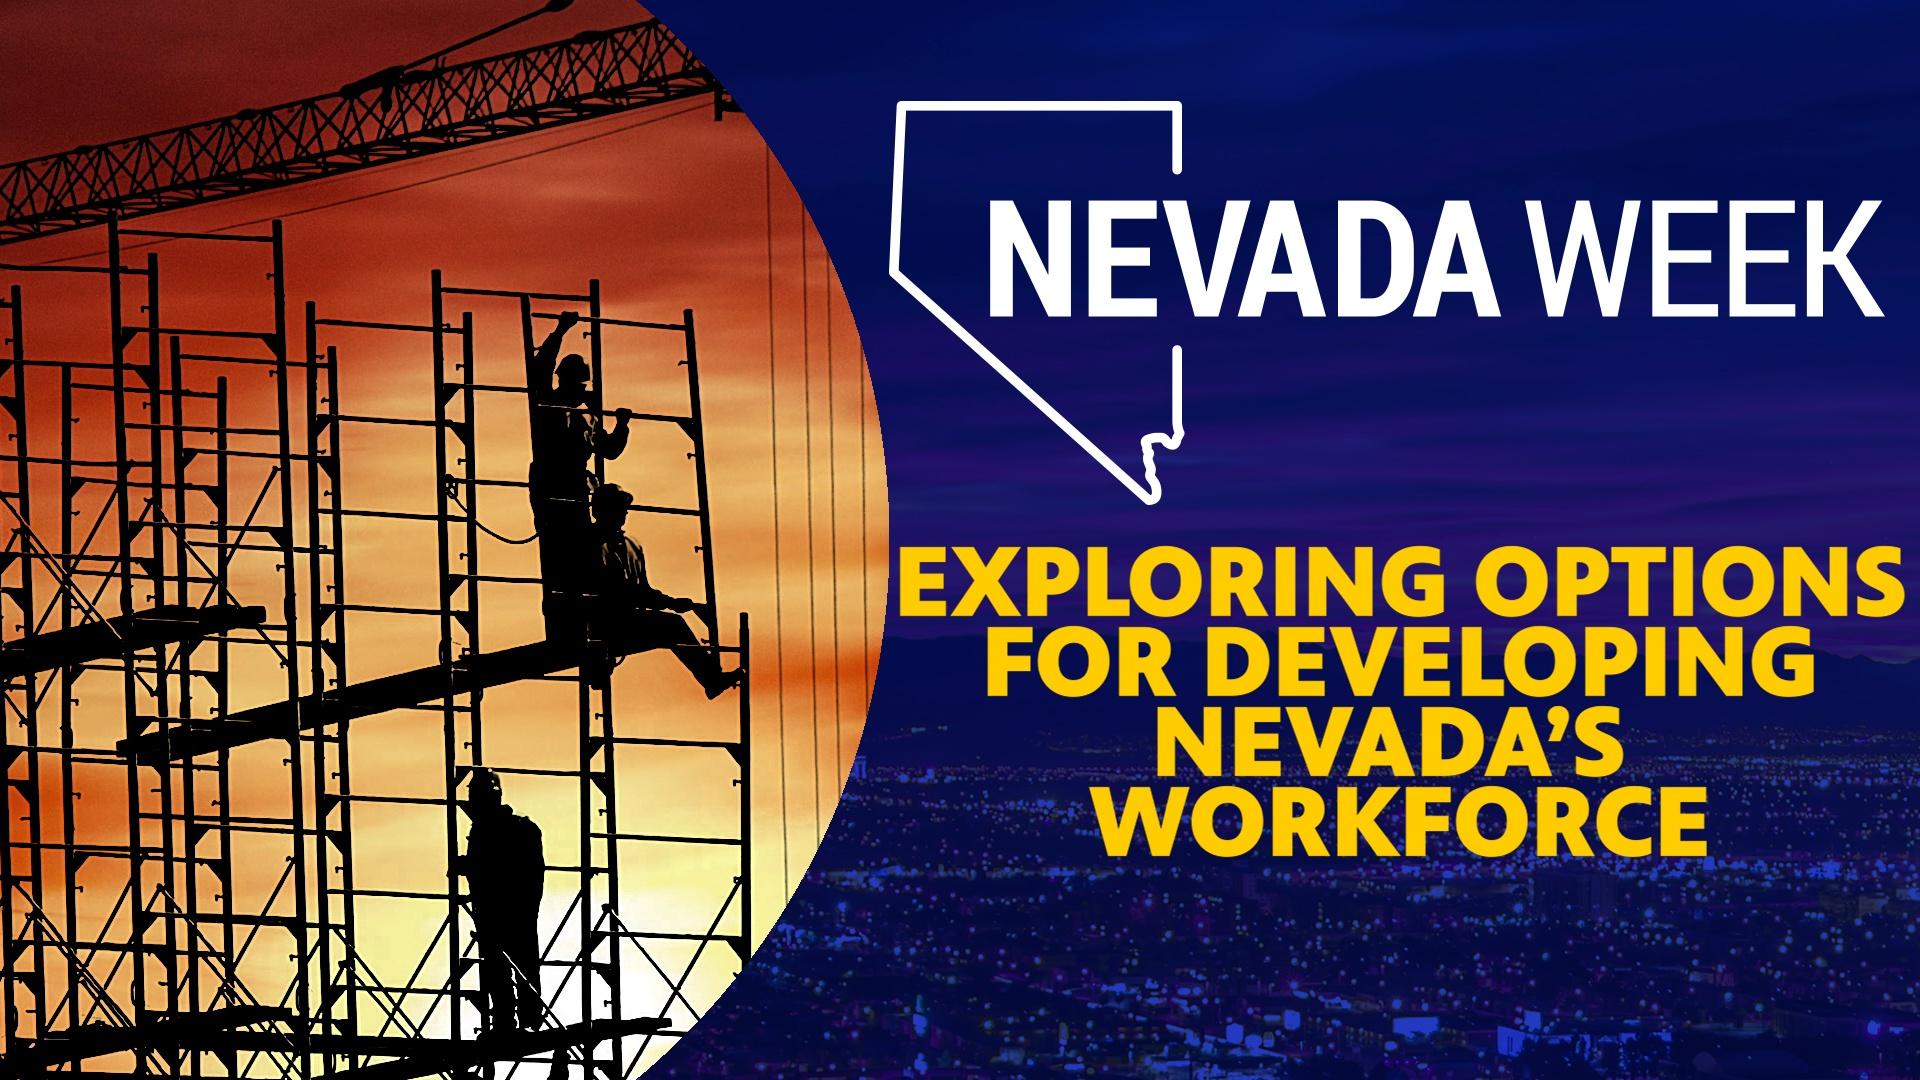 Exploring options for developing Nevada’s workforce